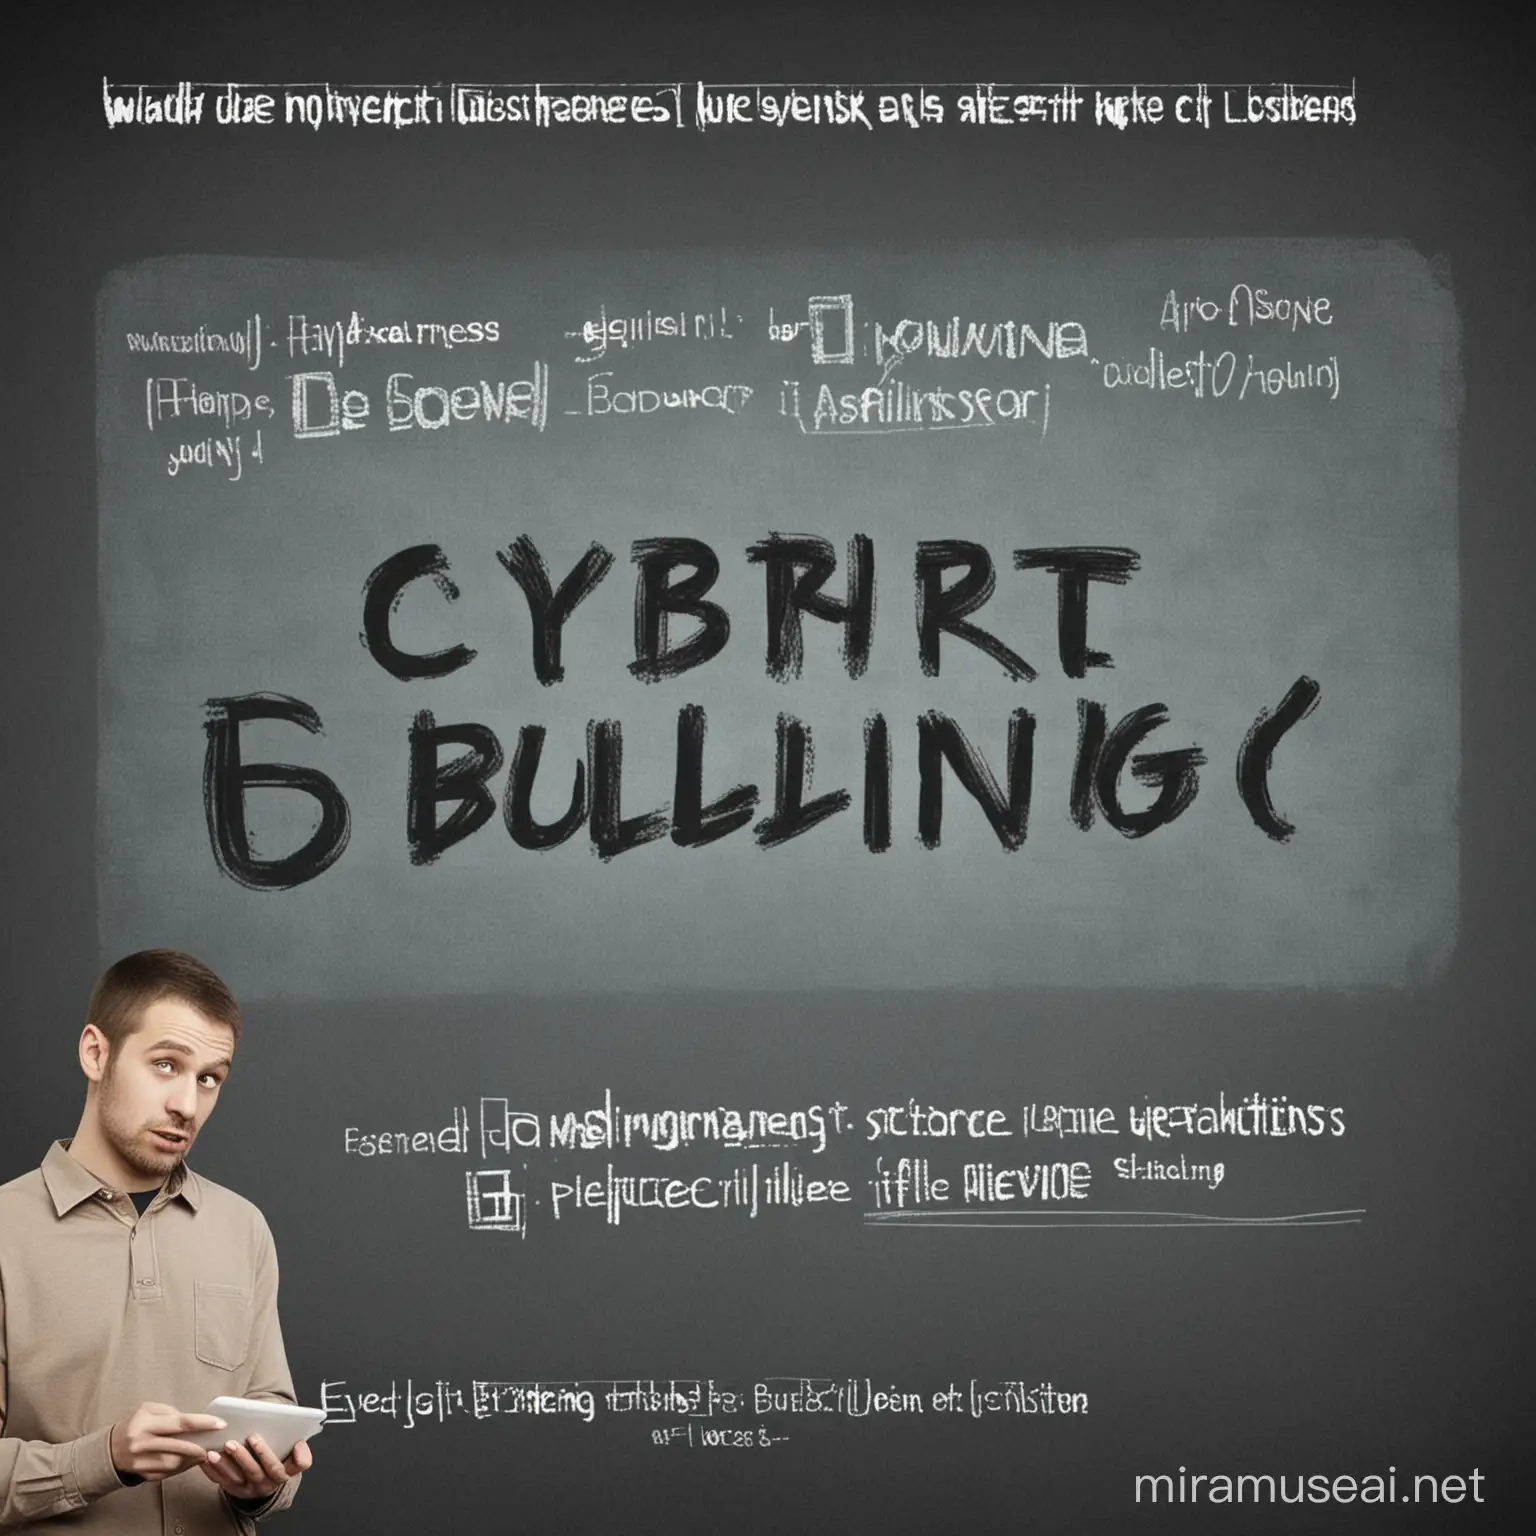 Online Harassment Dealing with Cyberbullying